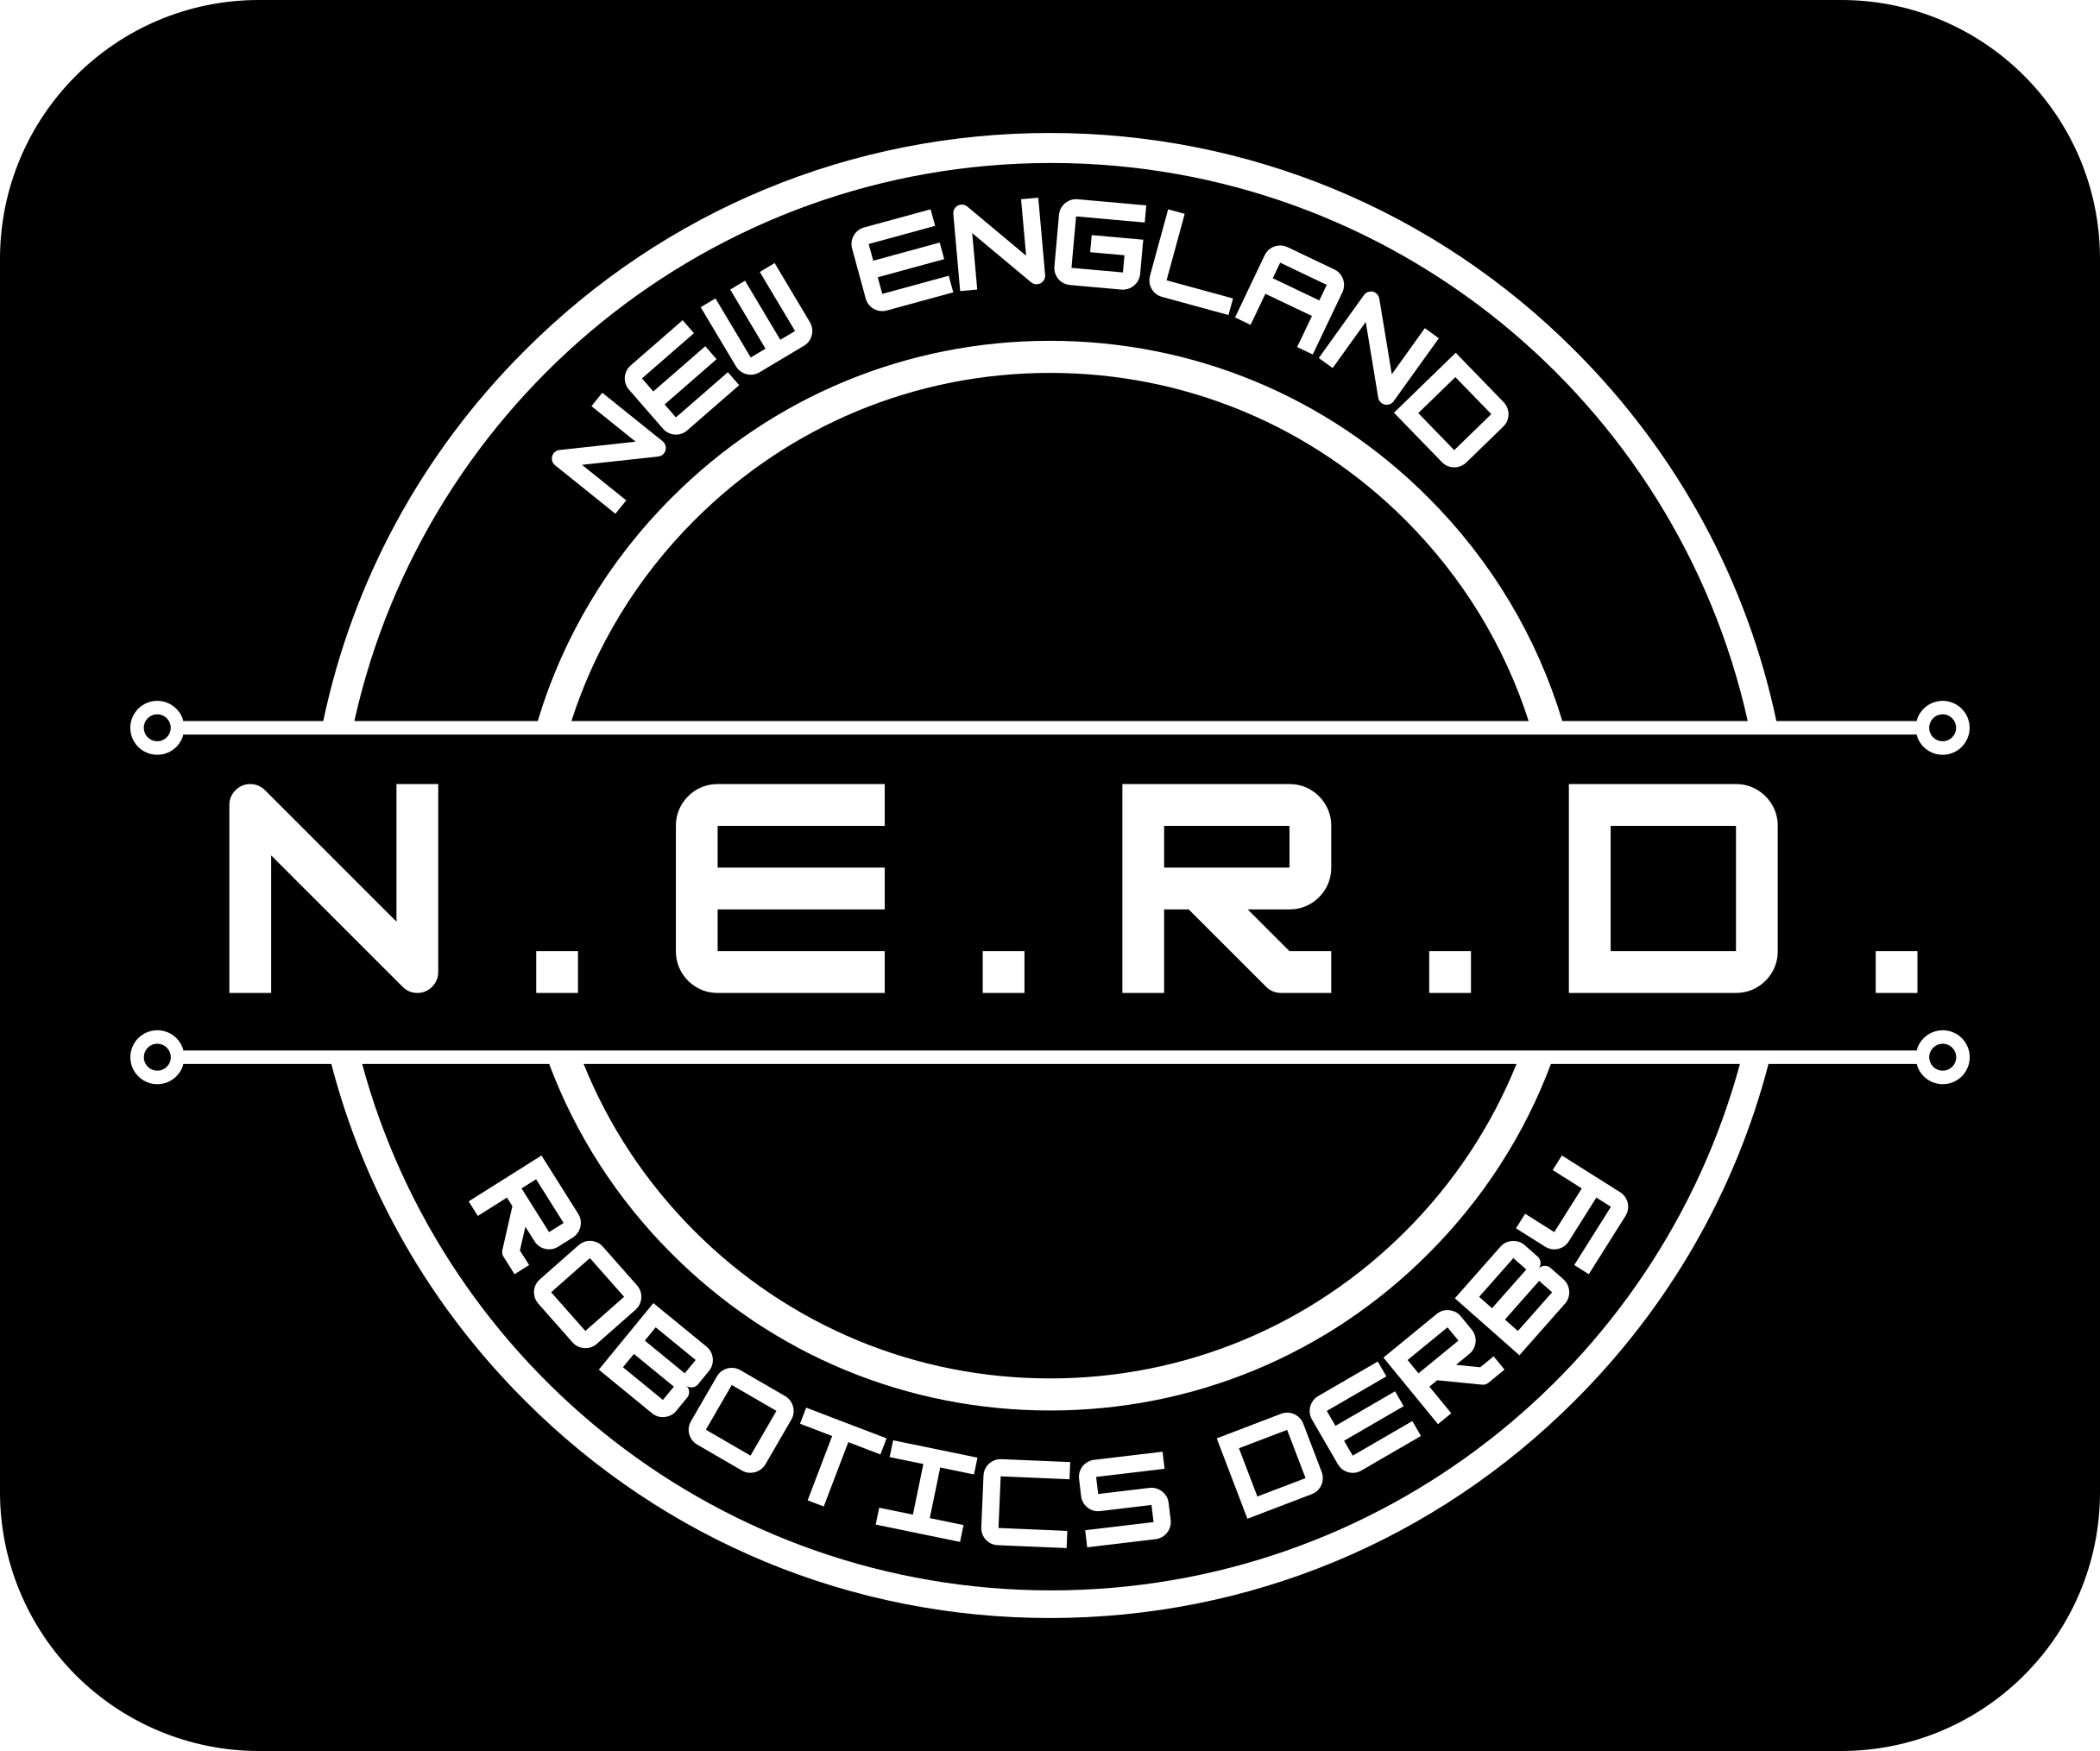 New Info - Game Master Update - Areoblast nerf : r/TheSilphRoad